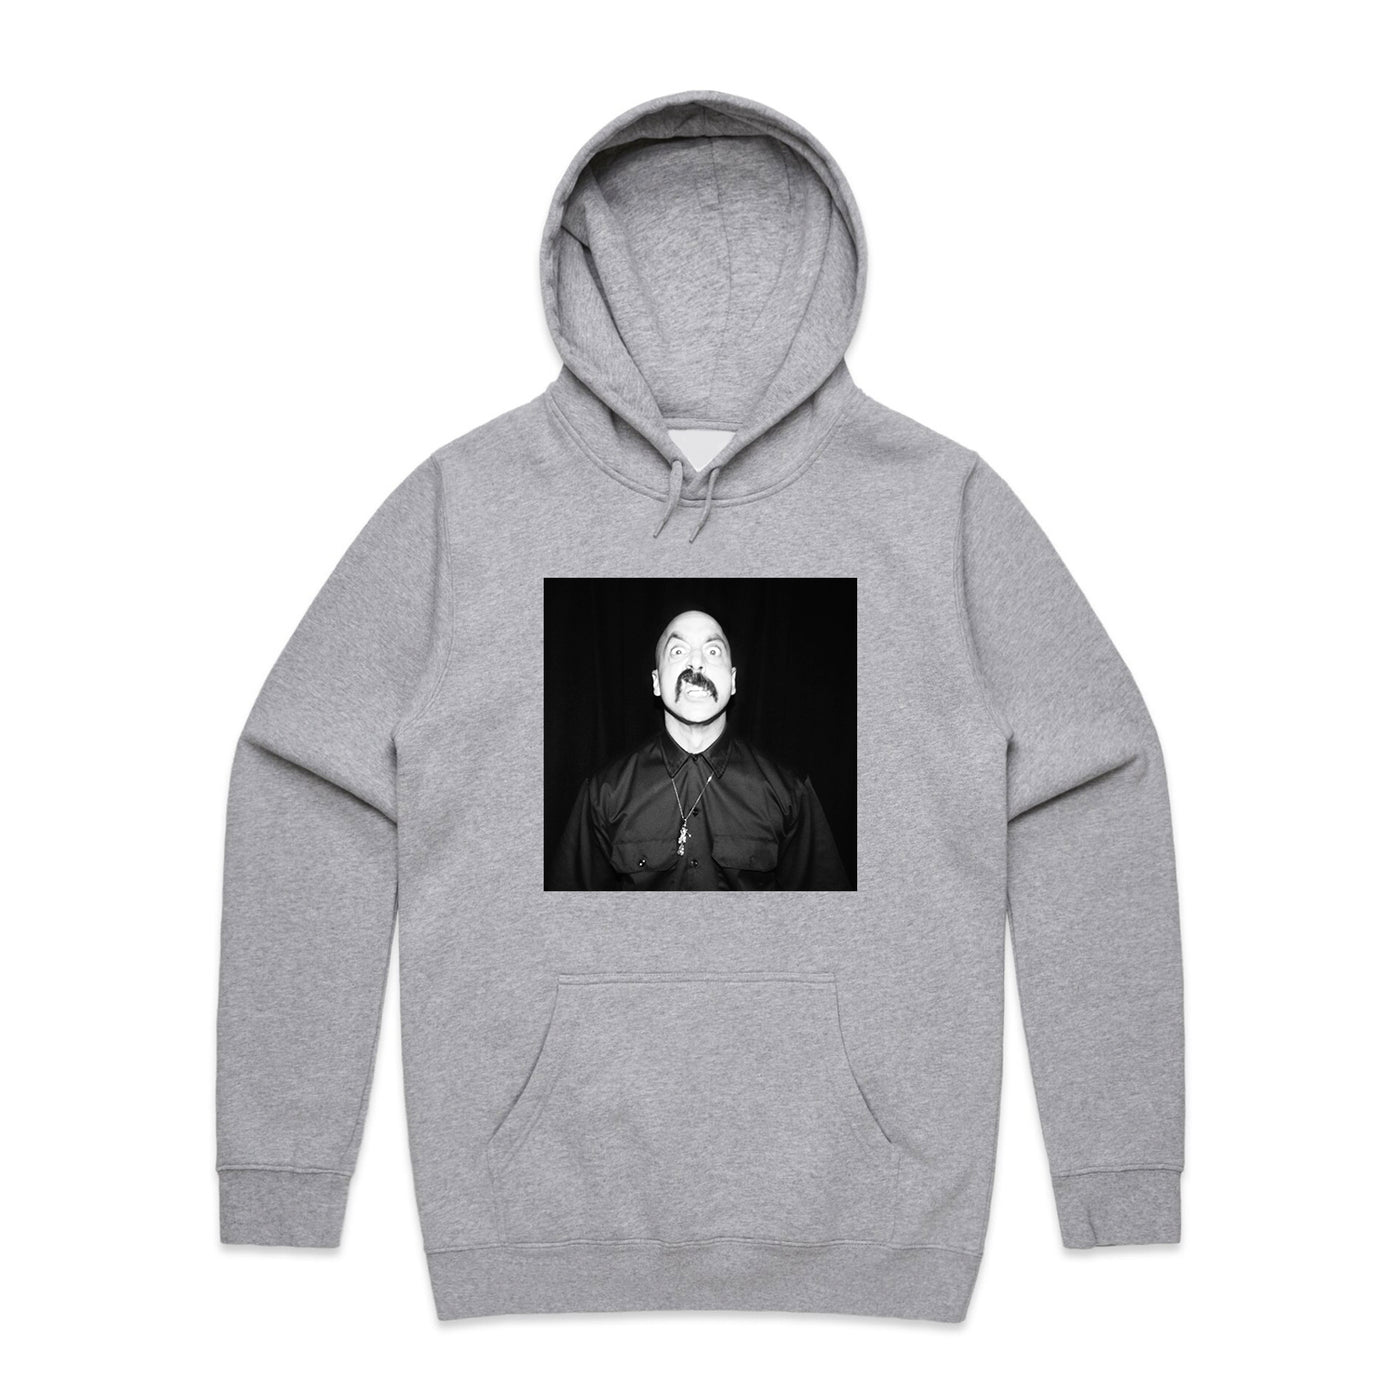 N8NOFACE - Bound to Let You Down (The Remixes) Grey Hoodie